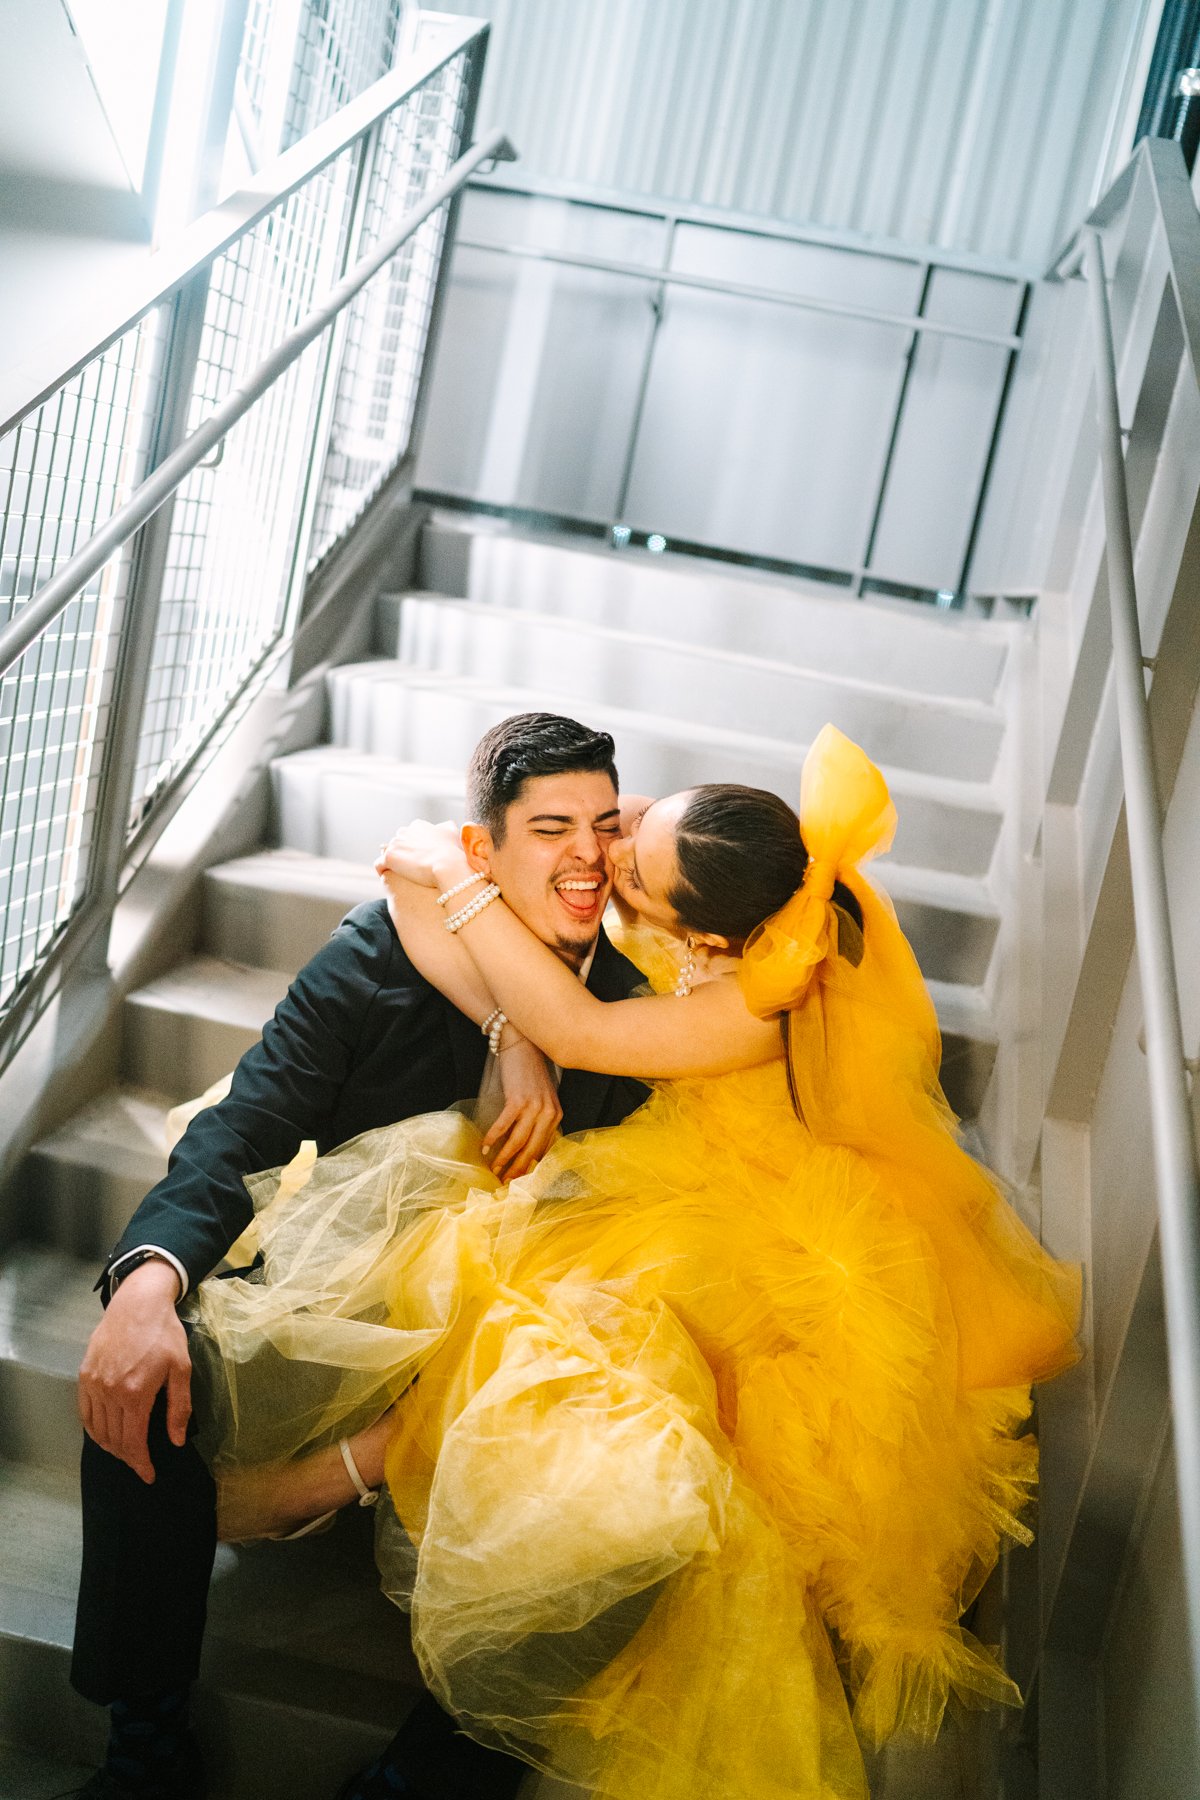 colorful-and-fun-wedding-in-downtown-bentonville-photographed-by-the-villar-photo-co, superfine-sweet-shoppe-wedding, editorial-wedding-photographer-in-arkansas